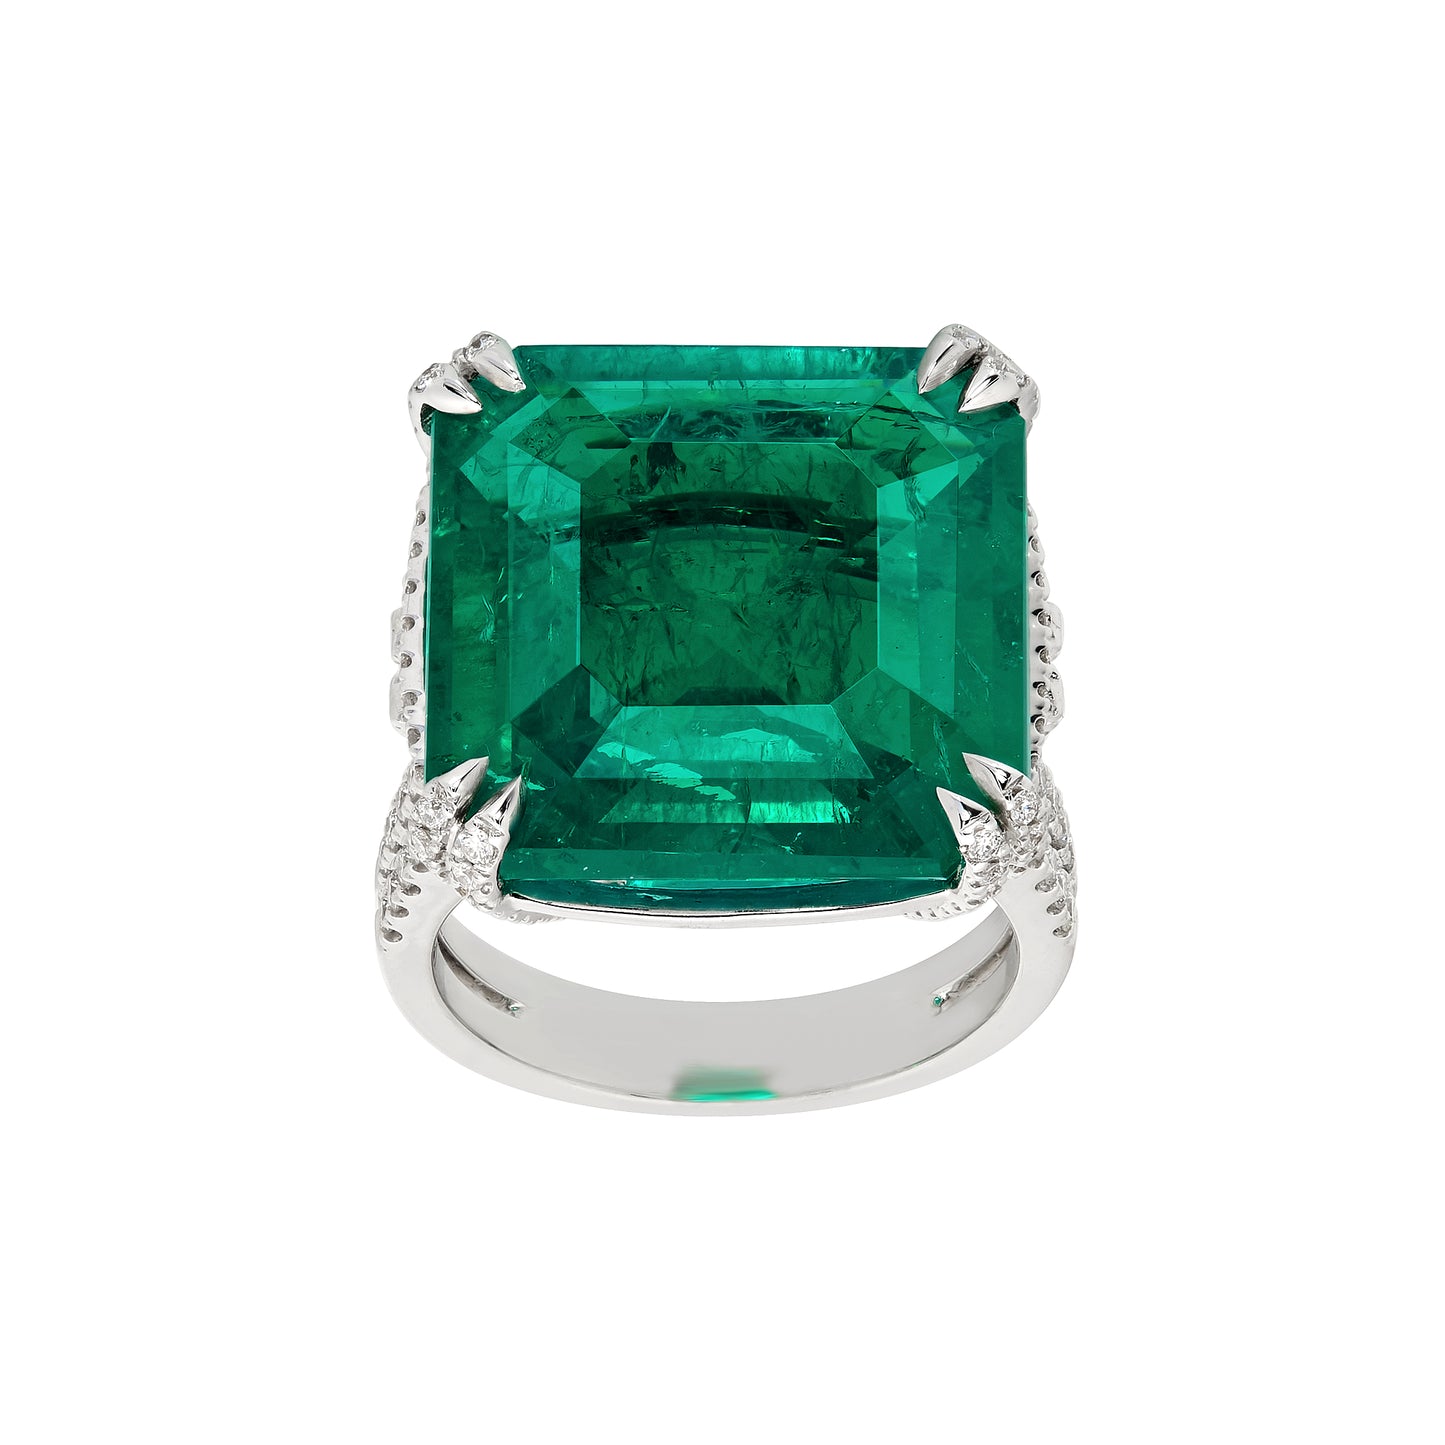 GREEN EMERALD AND WHITE GOLD RING